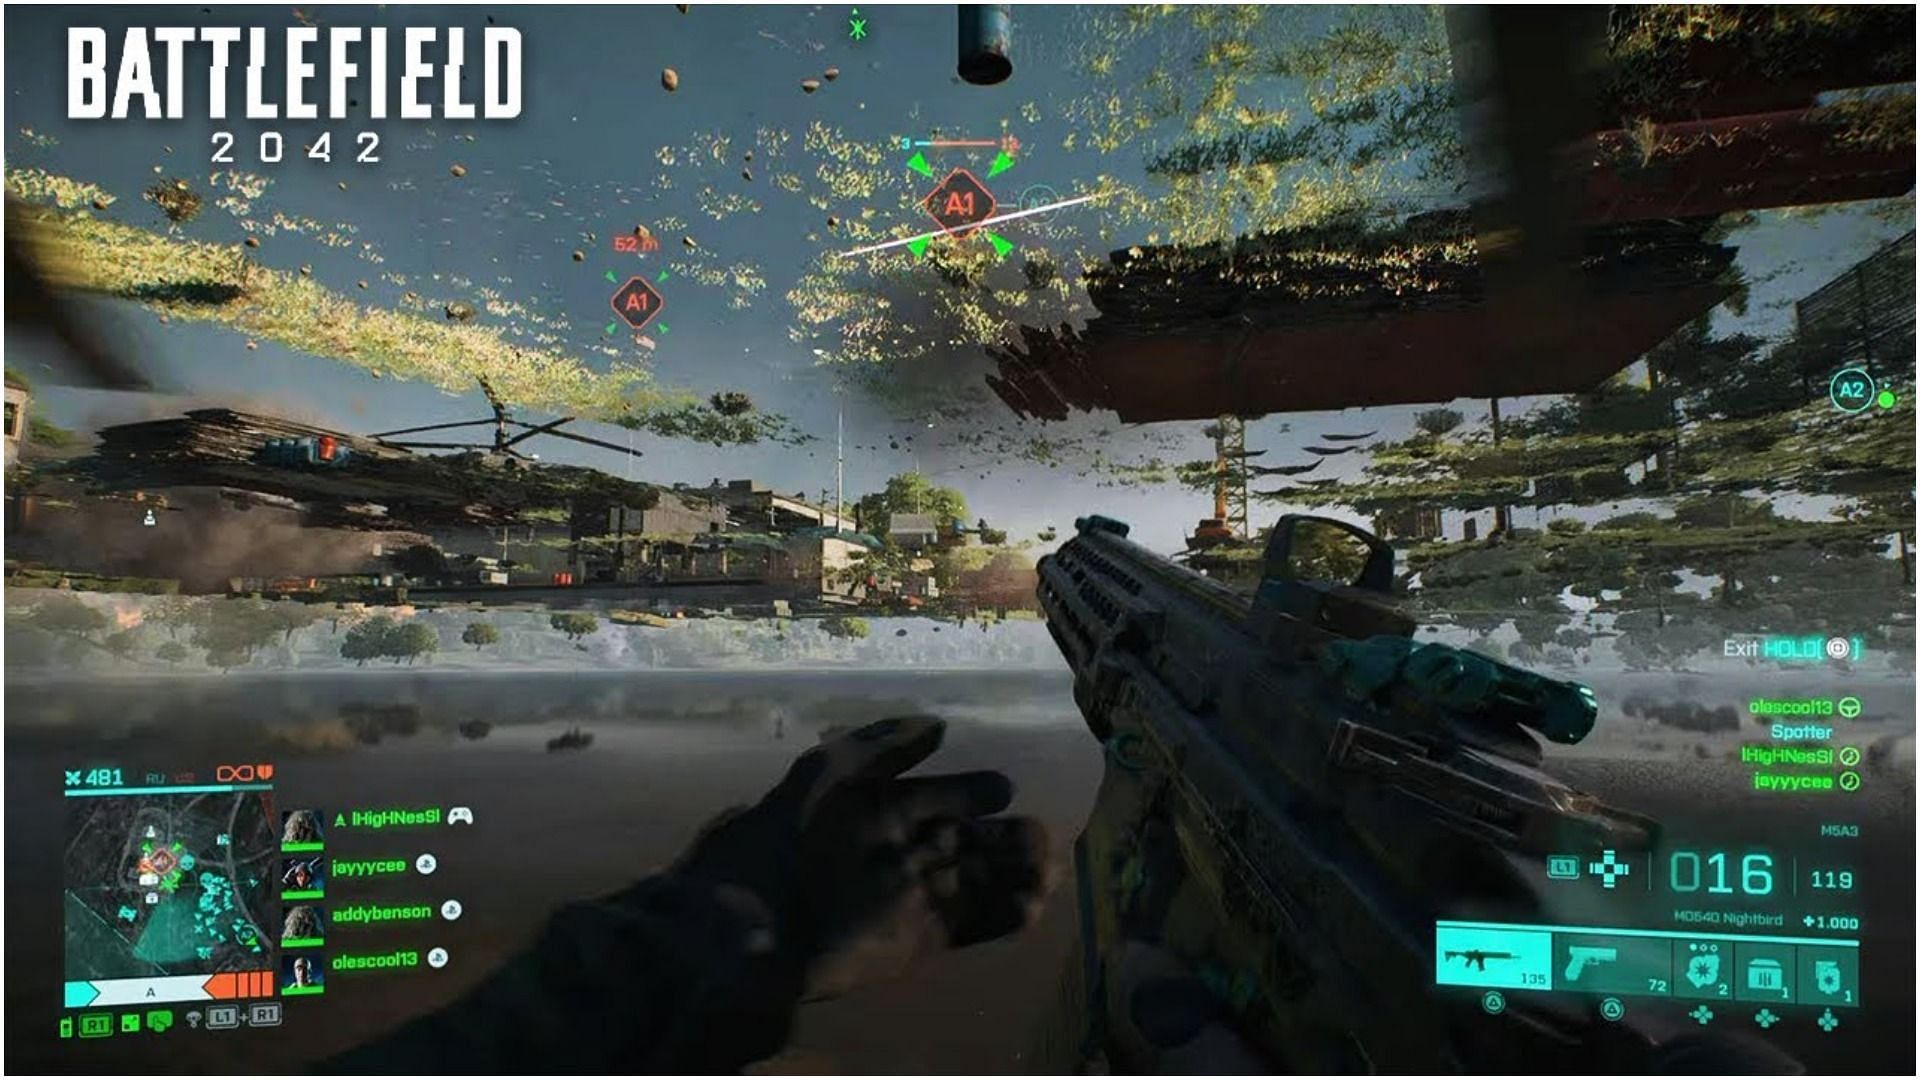 The game is still suffering from a number of major bugs (Image via YouTube/Jayyycee)